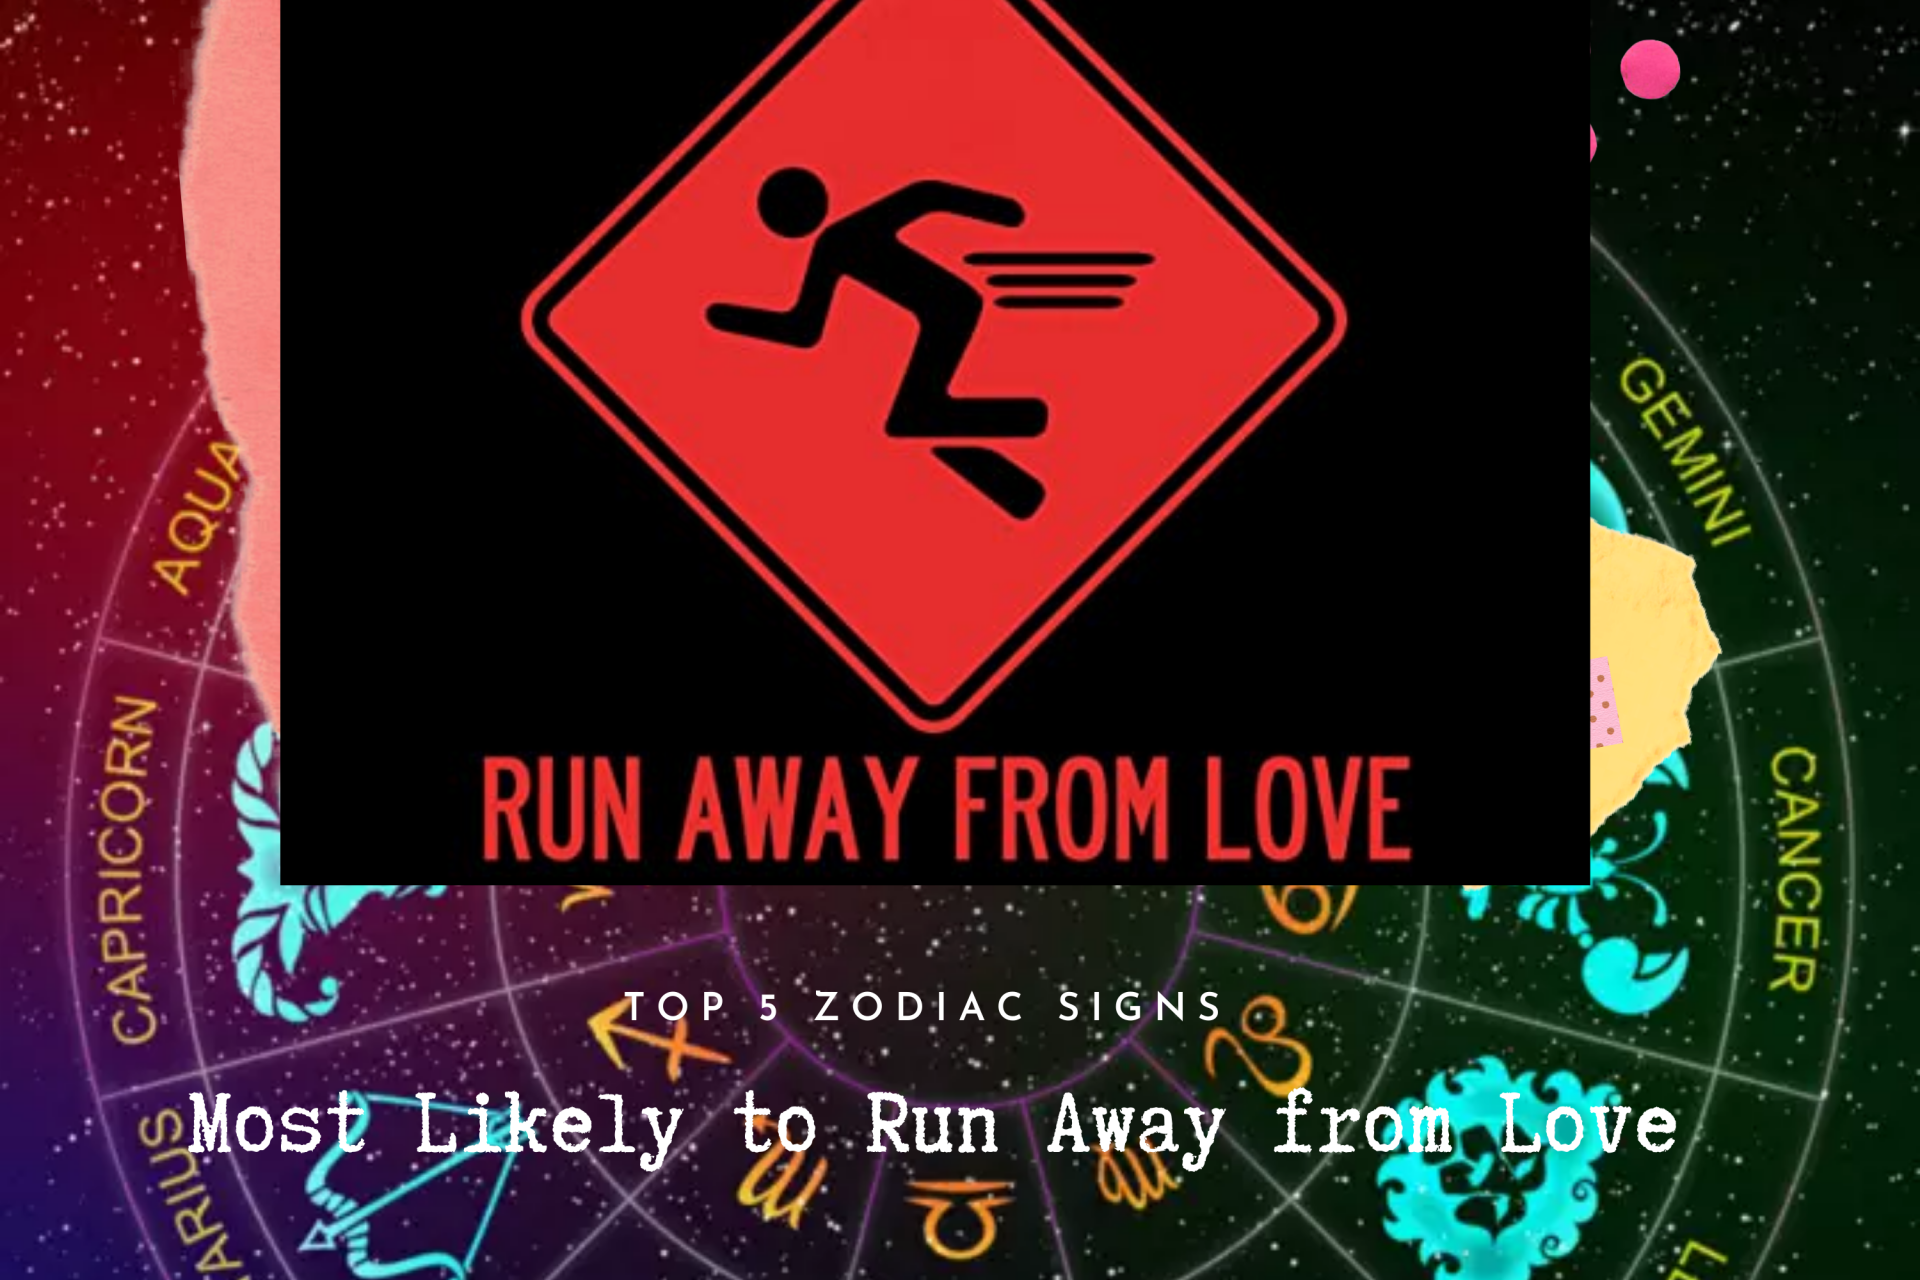 Zodiac Signs most likely to run away from love. Photo: KnowInsiders